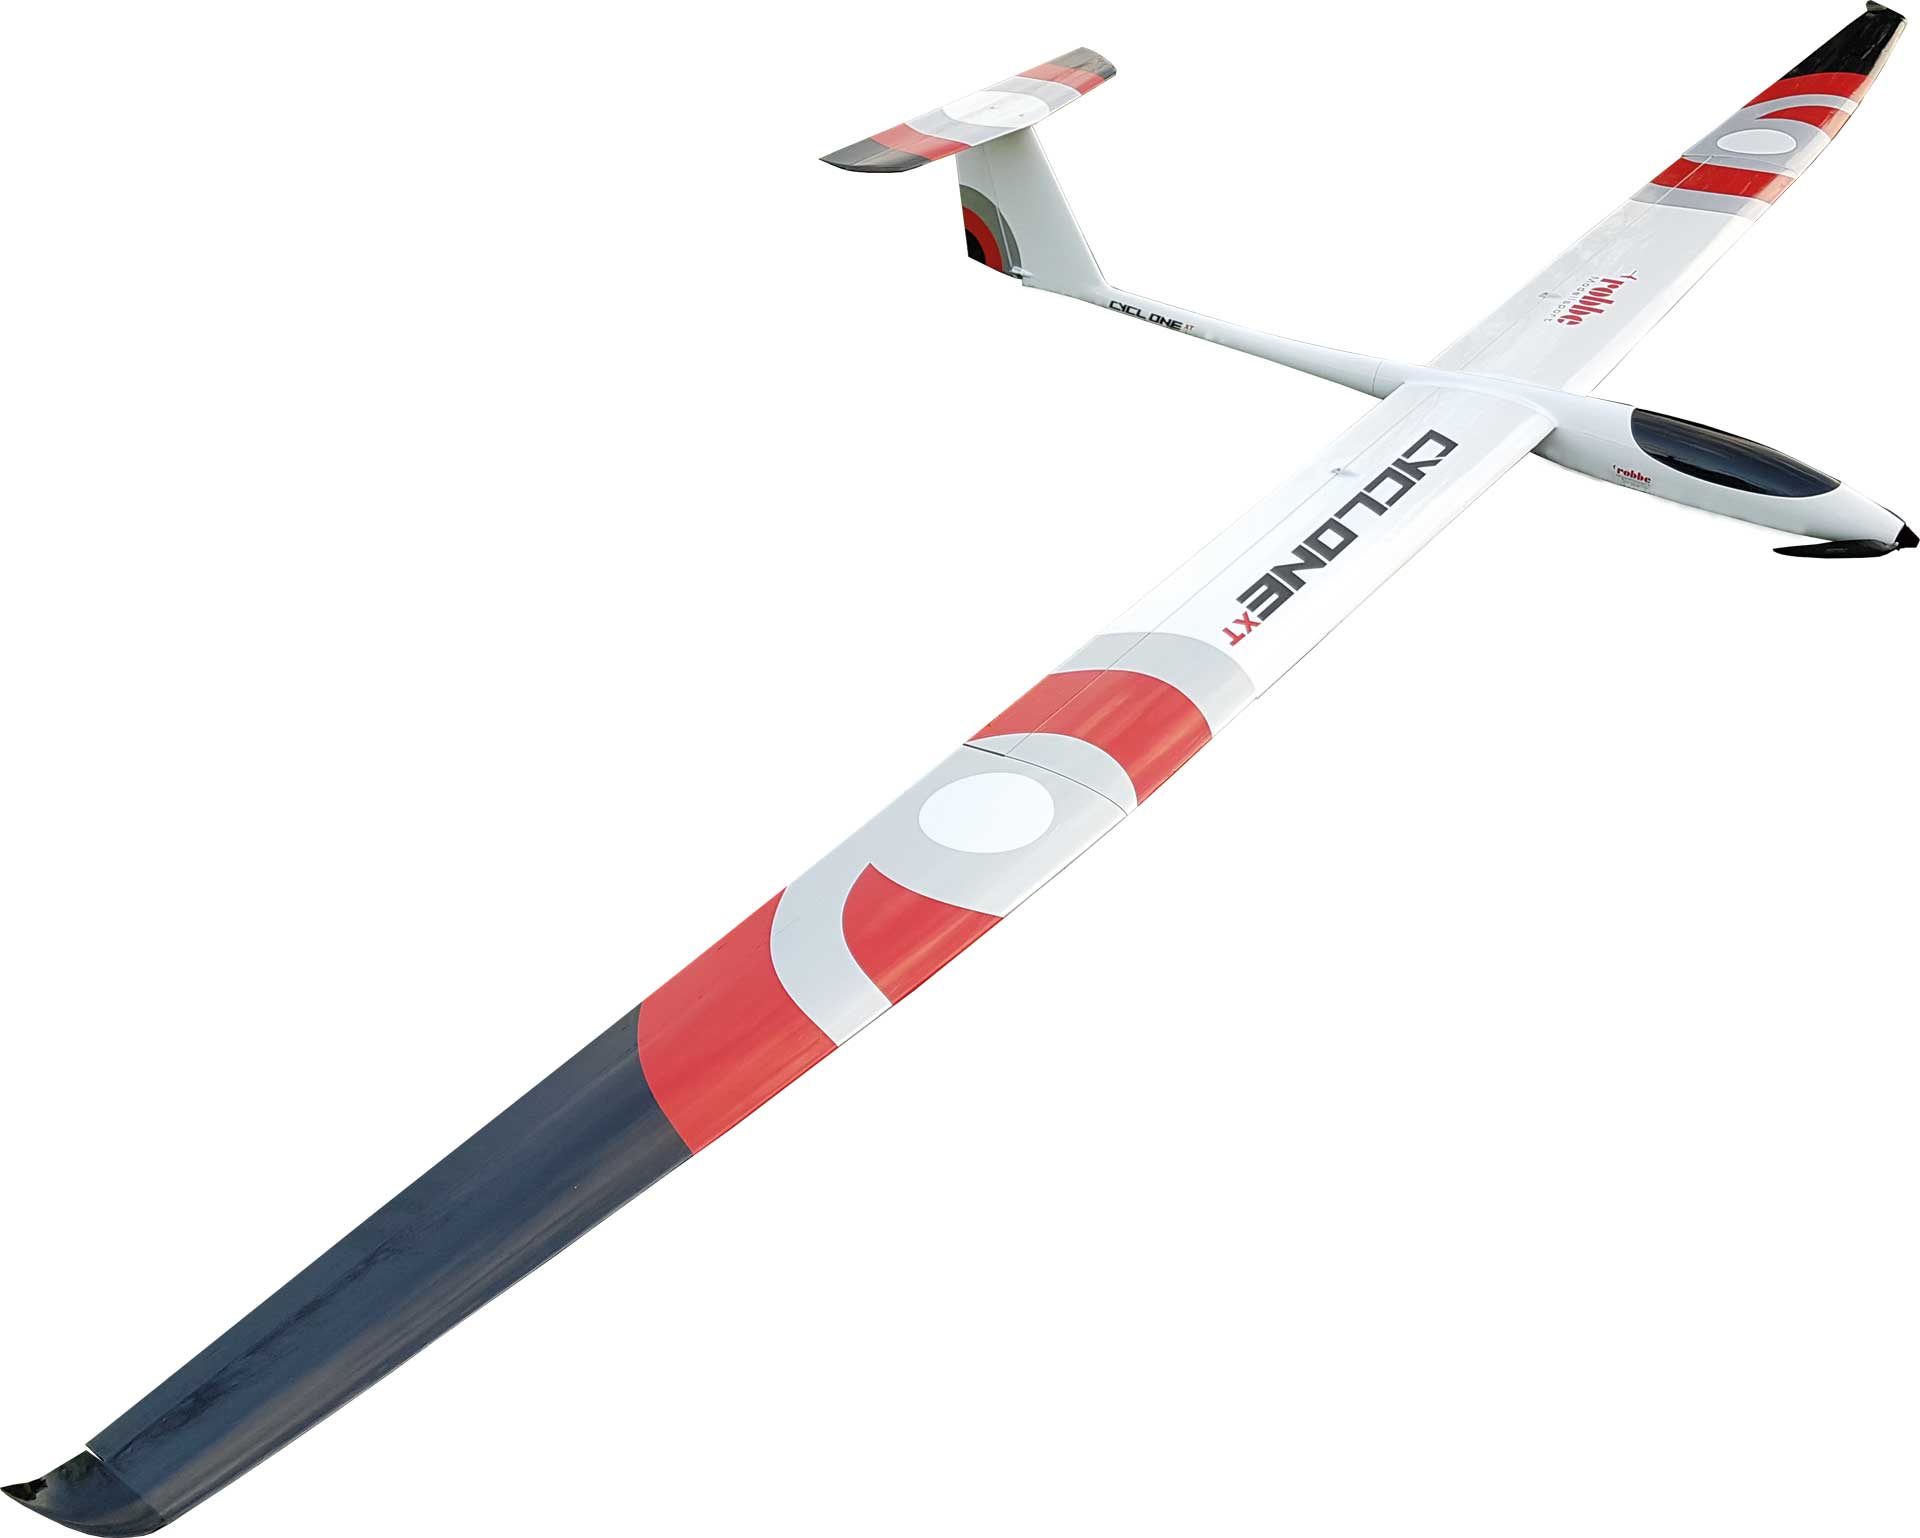 Robbe Modellsport Cyclone XT 6,2M ARF mit GRP FUSELAGE 4-piece wing with abachi planking